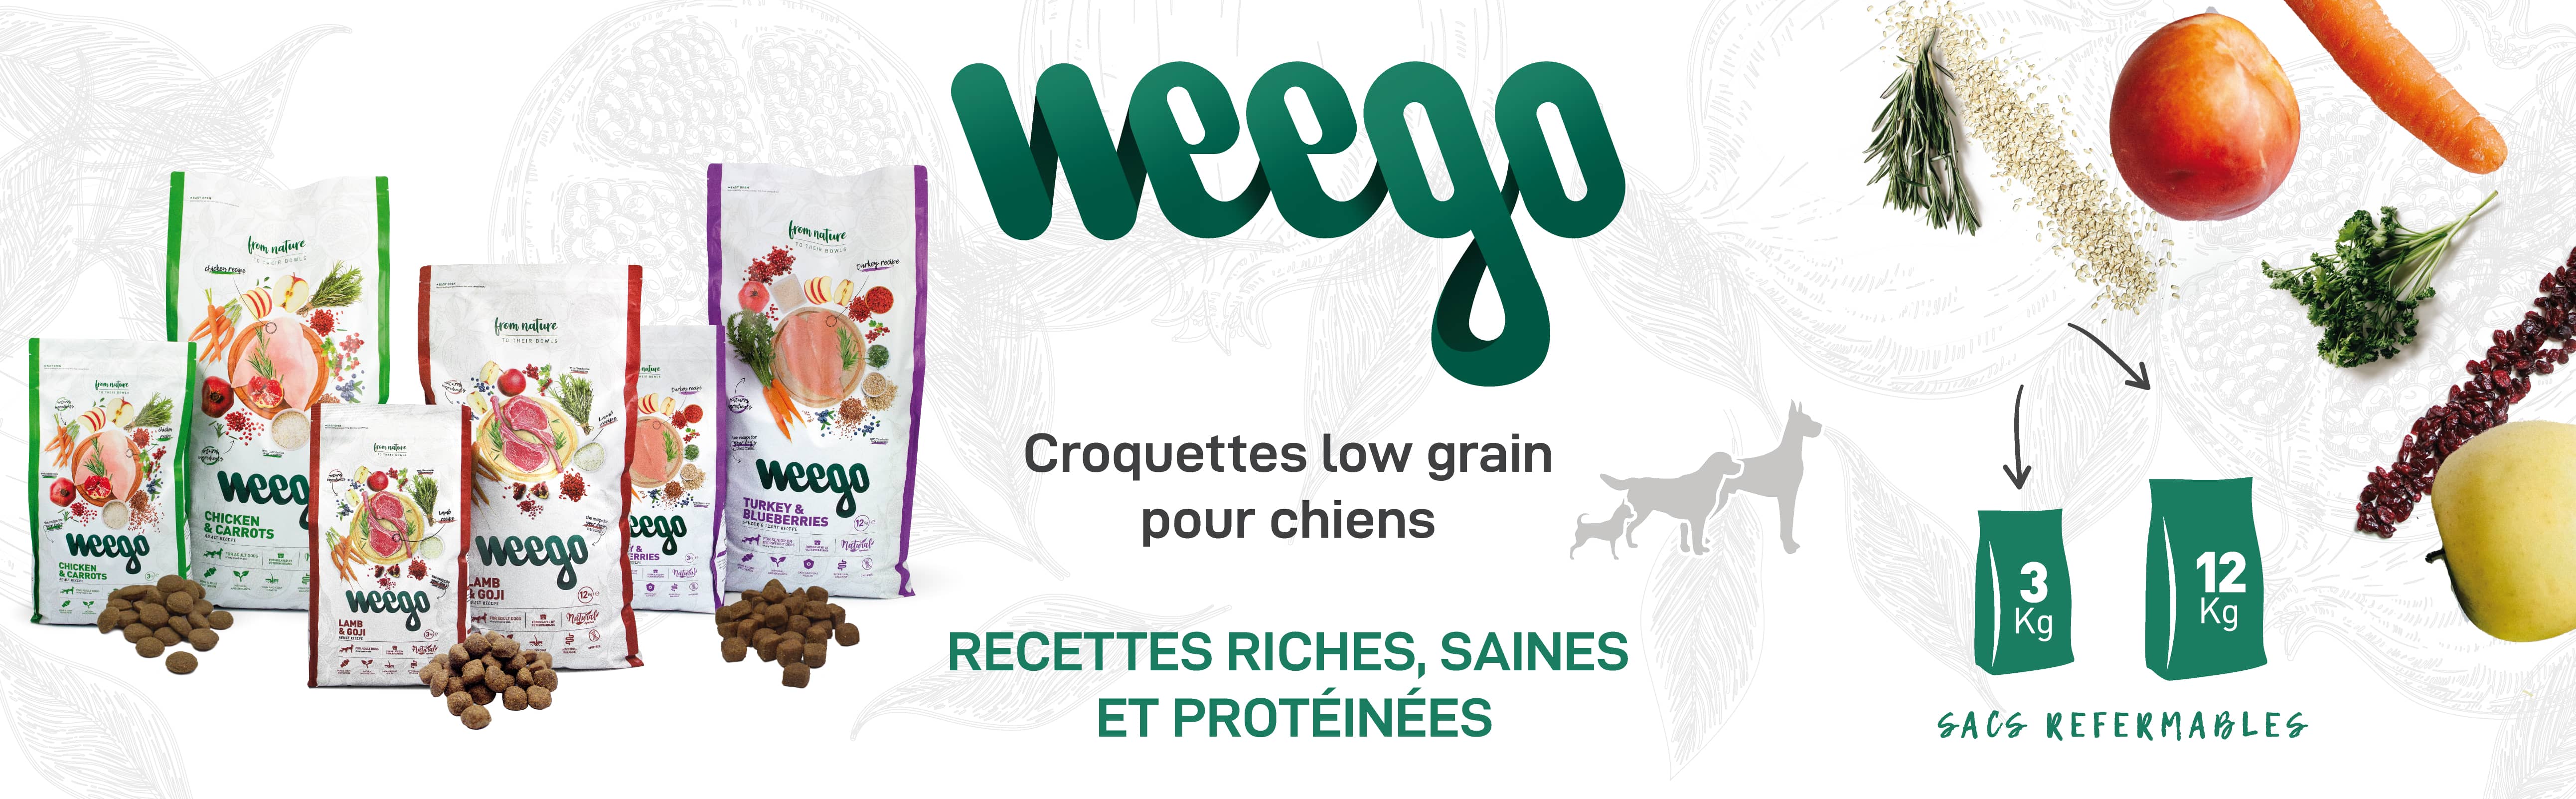 Croquettes-Weego-Chien-Low2-compressor